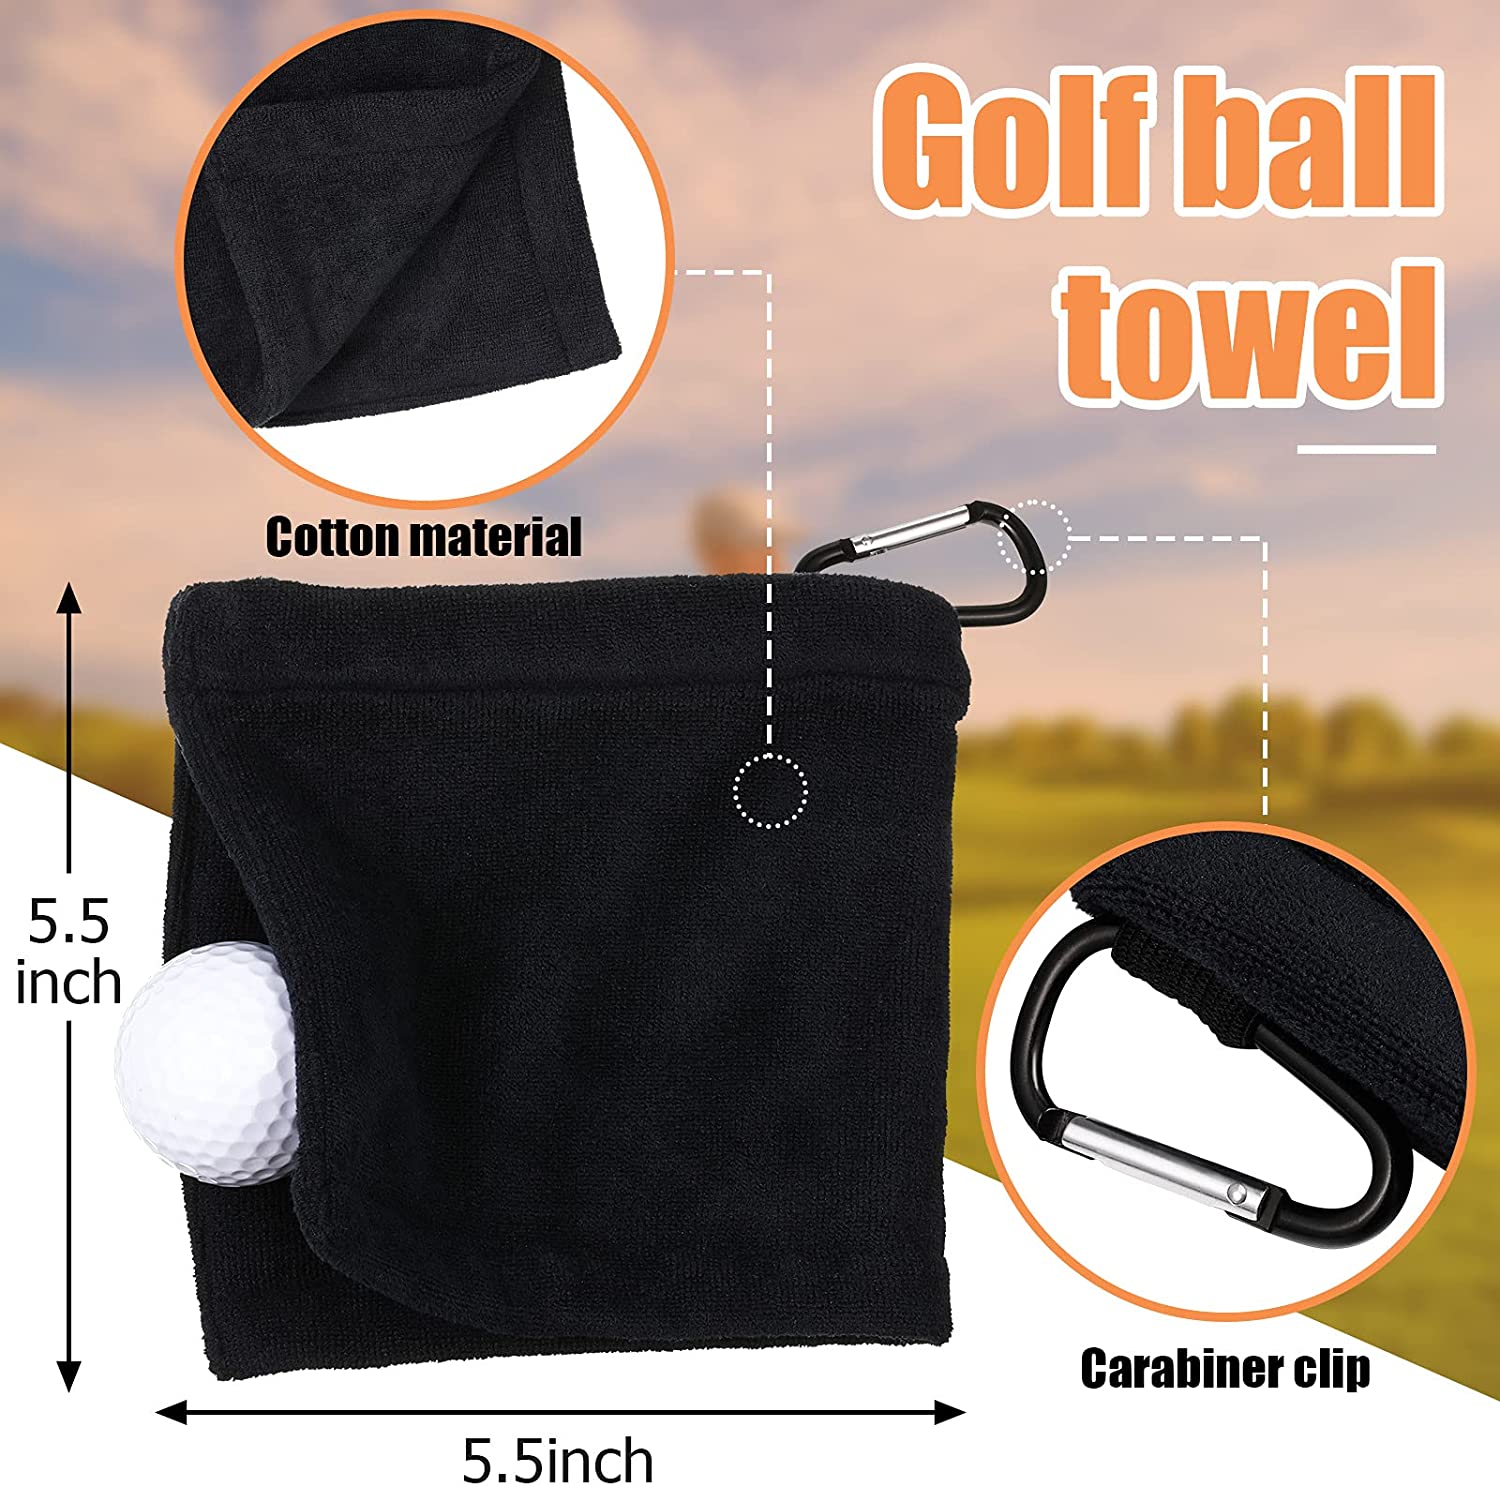 Golf Ball Towel 5.5 x 5.5 Inch Black Golf Wet and Dry Golf Towel Pocket Golf Towel with Clip Ball Towel Golf Ball Towel for Golf Course Exercise Towel (3 Pieces) - image 2 of 7